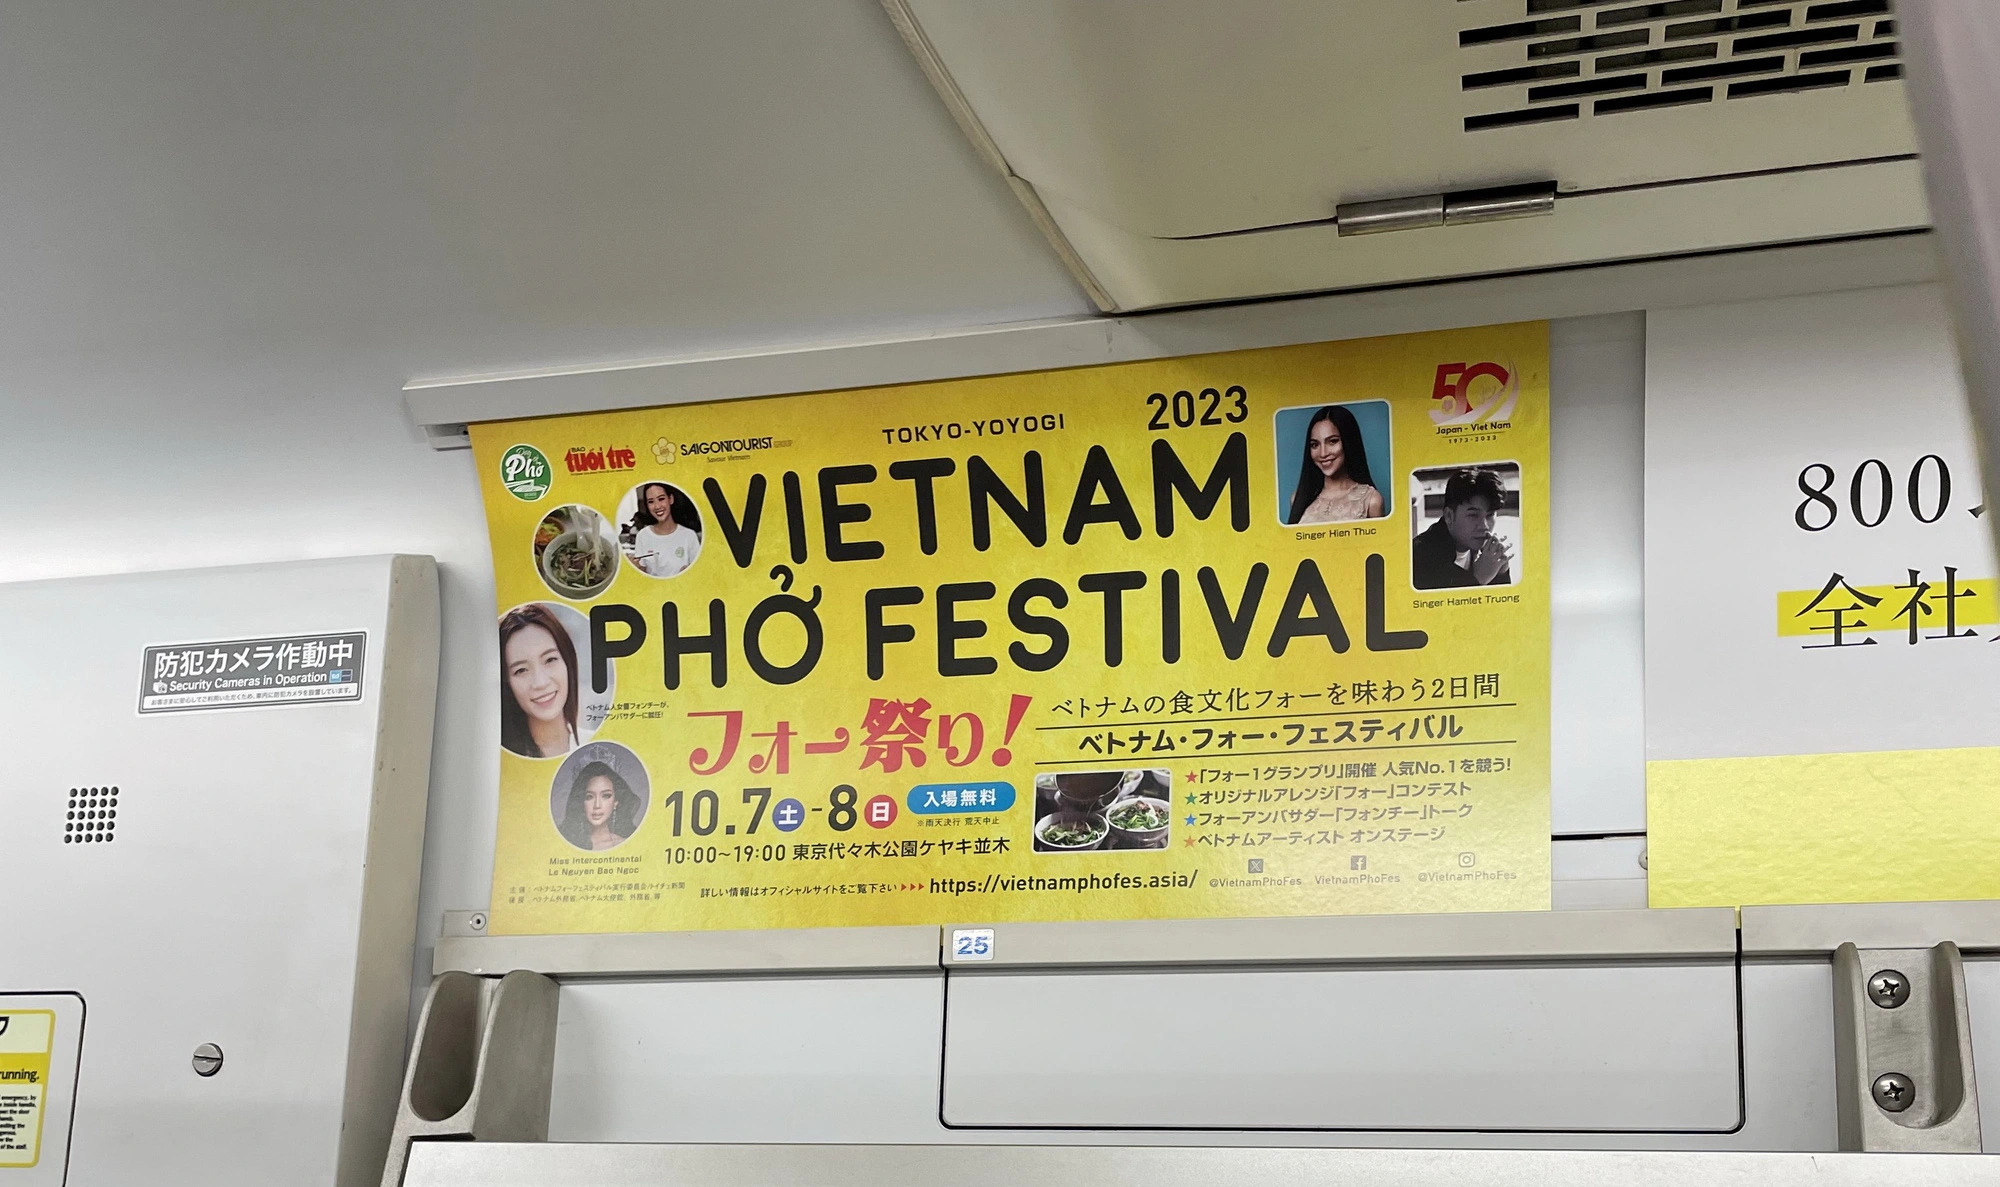 A poster promoting the Vietnam Pho Festival 2023 is seen on a subway train in Japan